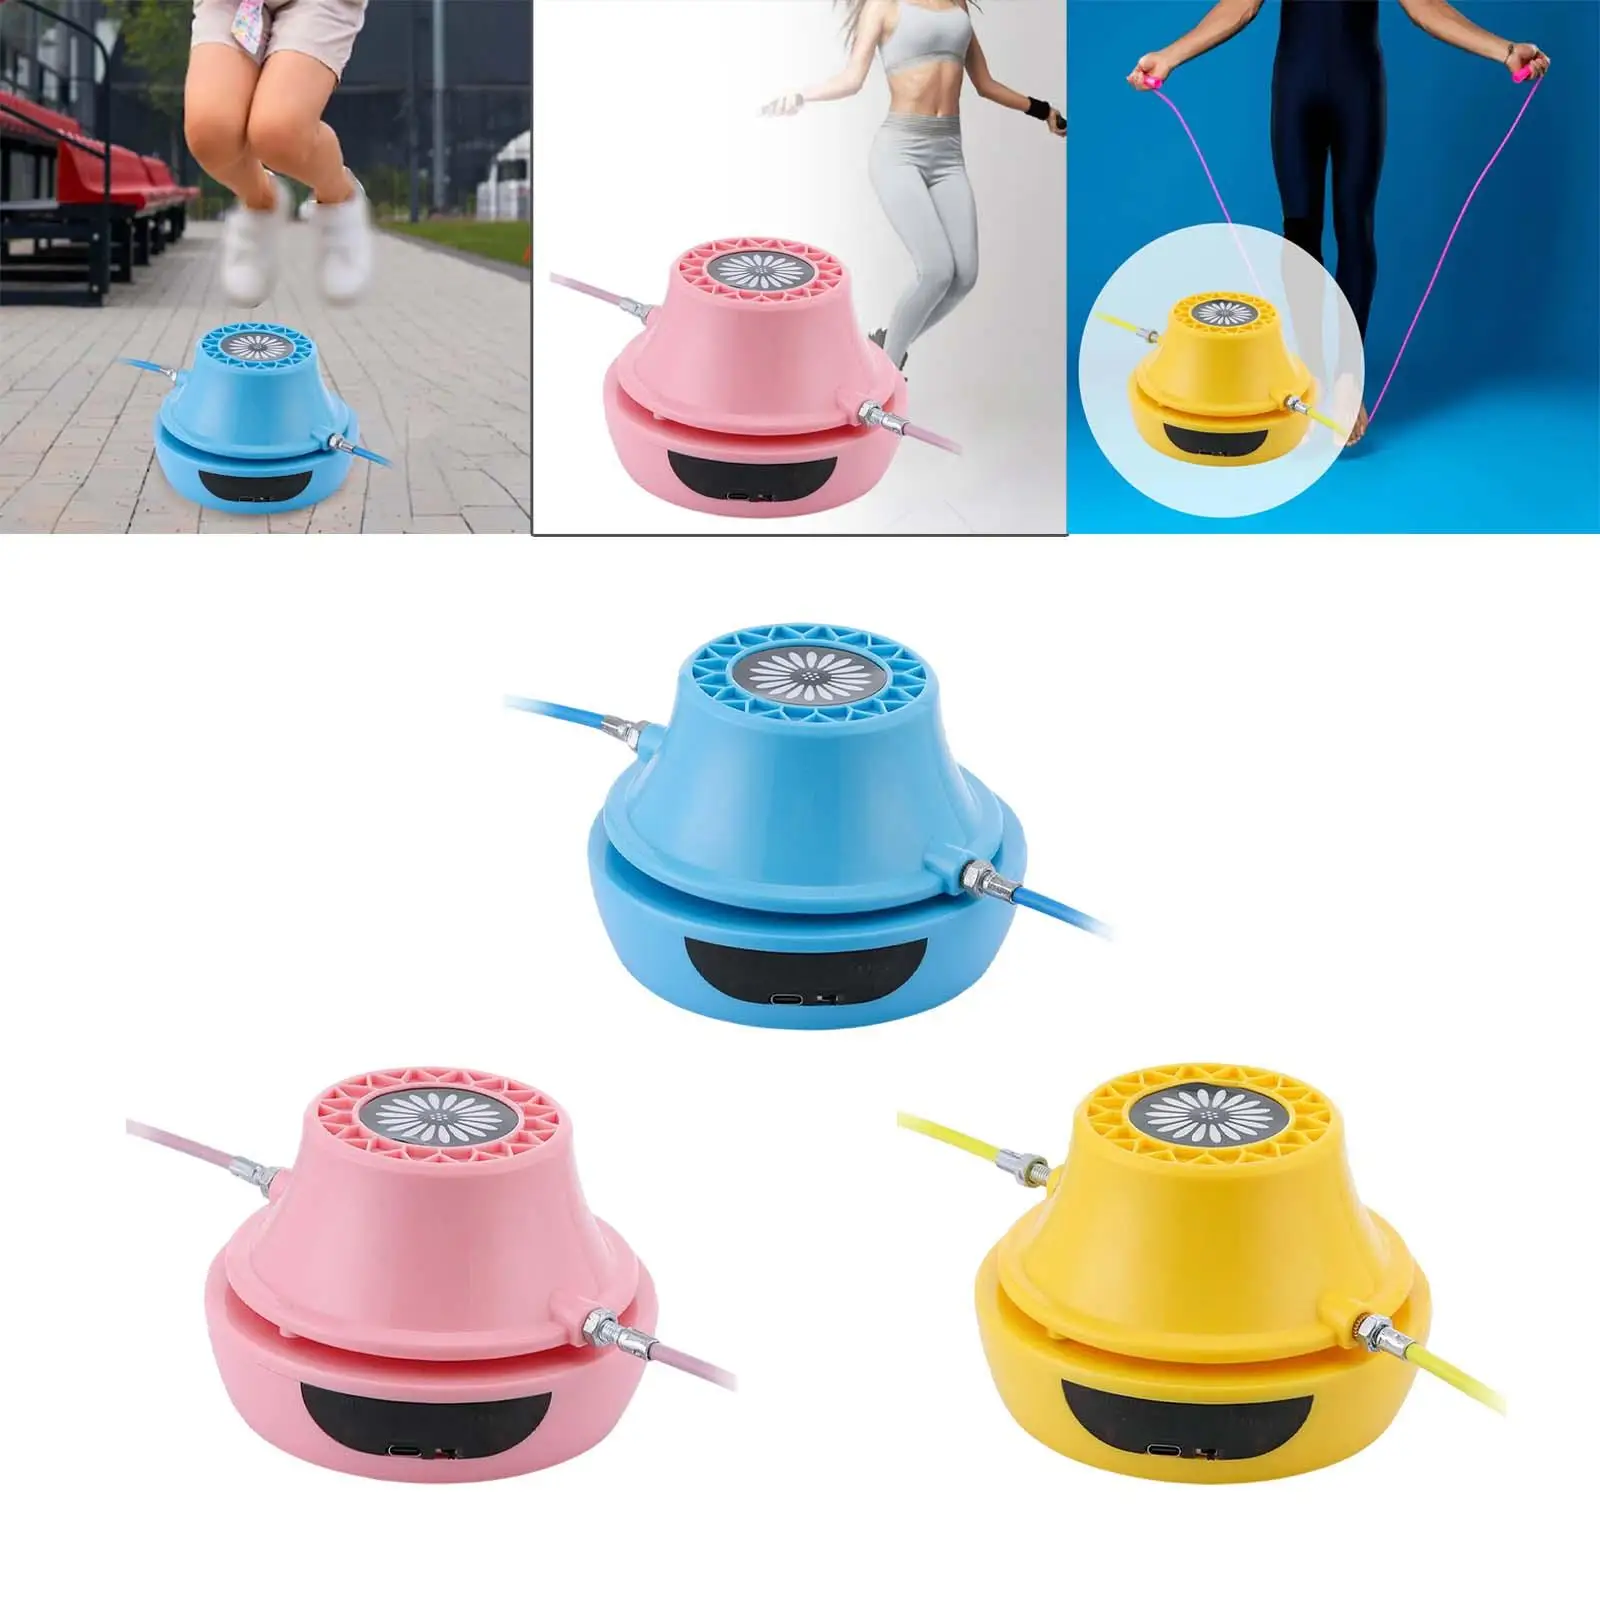 Jump Rope Machine Multiperson Entertainment Interaction with Smart Remote LED Display Workout Rope Skipping Machine Office